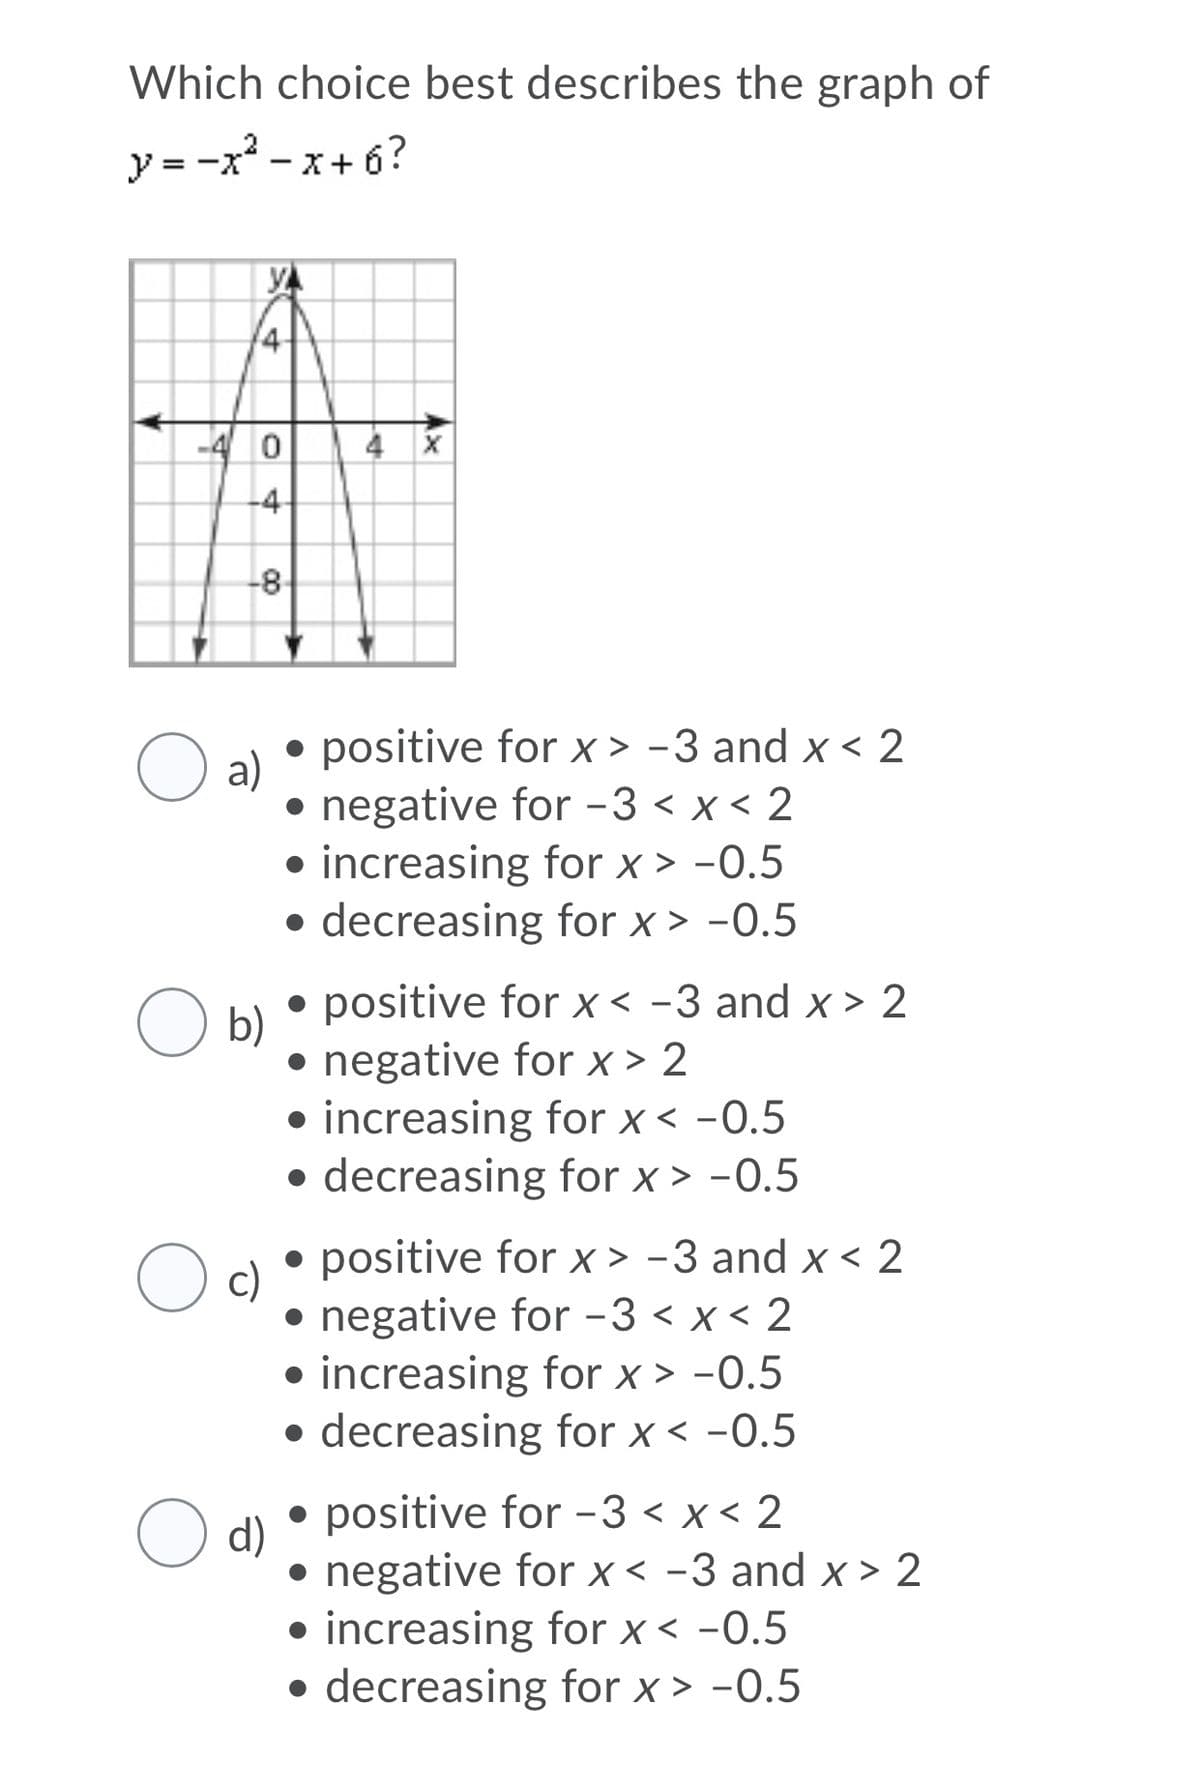 Which choice best describes the graph of
y = -x - x+ 6?
YA
-4 0
-8-
positive for x > -3 and x < 2
a)
• negative for -3 < x < 2
• increasing for x > -0.5
• decreasing for x > -0.5
positive for x < -3 and x > 2
b)
• negative for x > 2
• increasing for x < -0.5
• decreasing for x > -0.5
• positive for x > -3 and x < 2
c)
• negative for -3 < x < 2
• increasing for x > -0.5
• decreasing for x < -0.5
positive for -3 < x < 2
d)
• negative for x< -3 and x > 2
• increasing for x < -0.5
• decreasing for x > -0.5
4.
